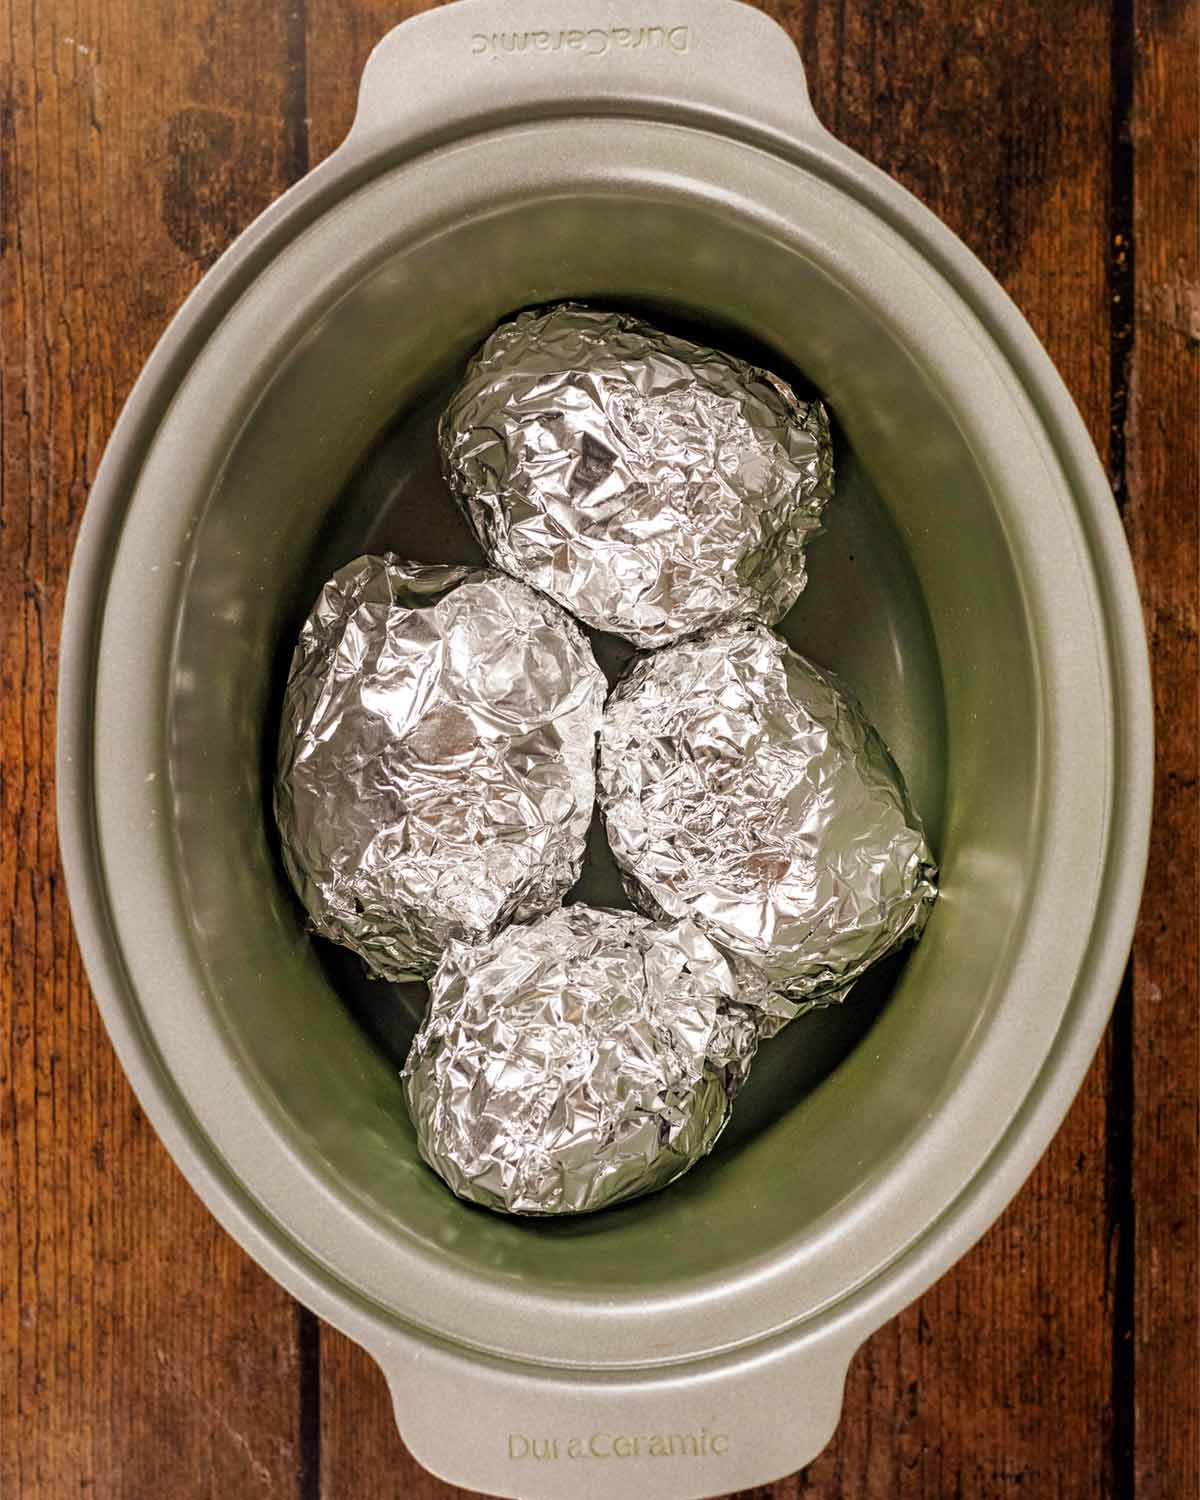 Four foil wrapped potatoes in a slow cooker.